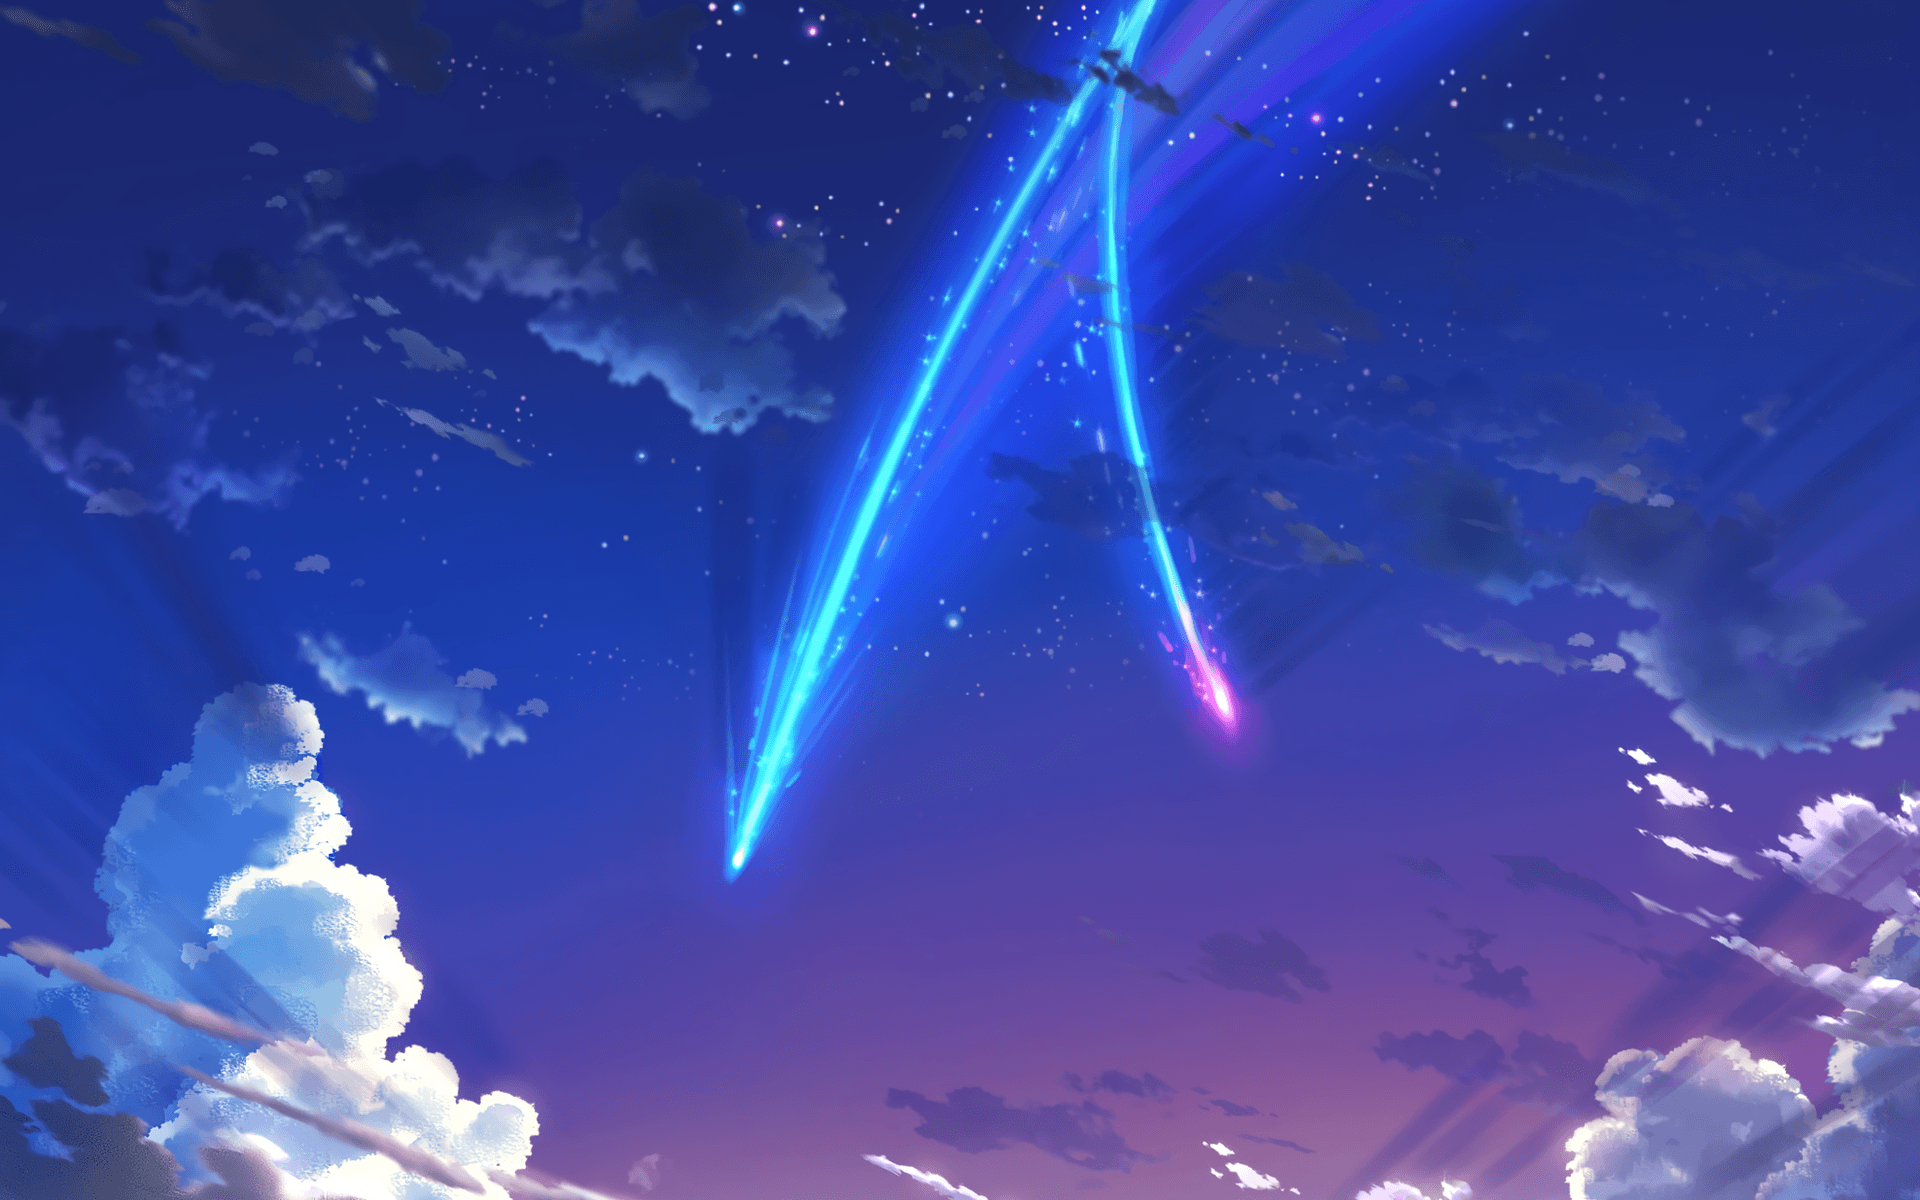 Your Name Anime Landscape Wallpapers - Top Free Your Name ...